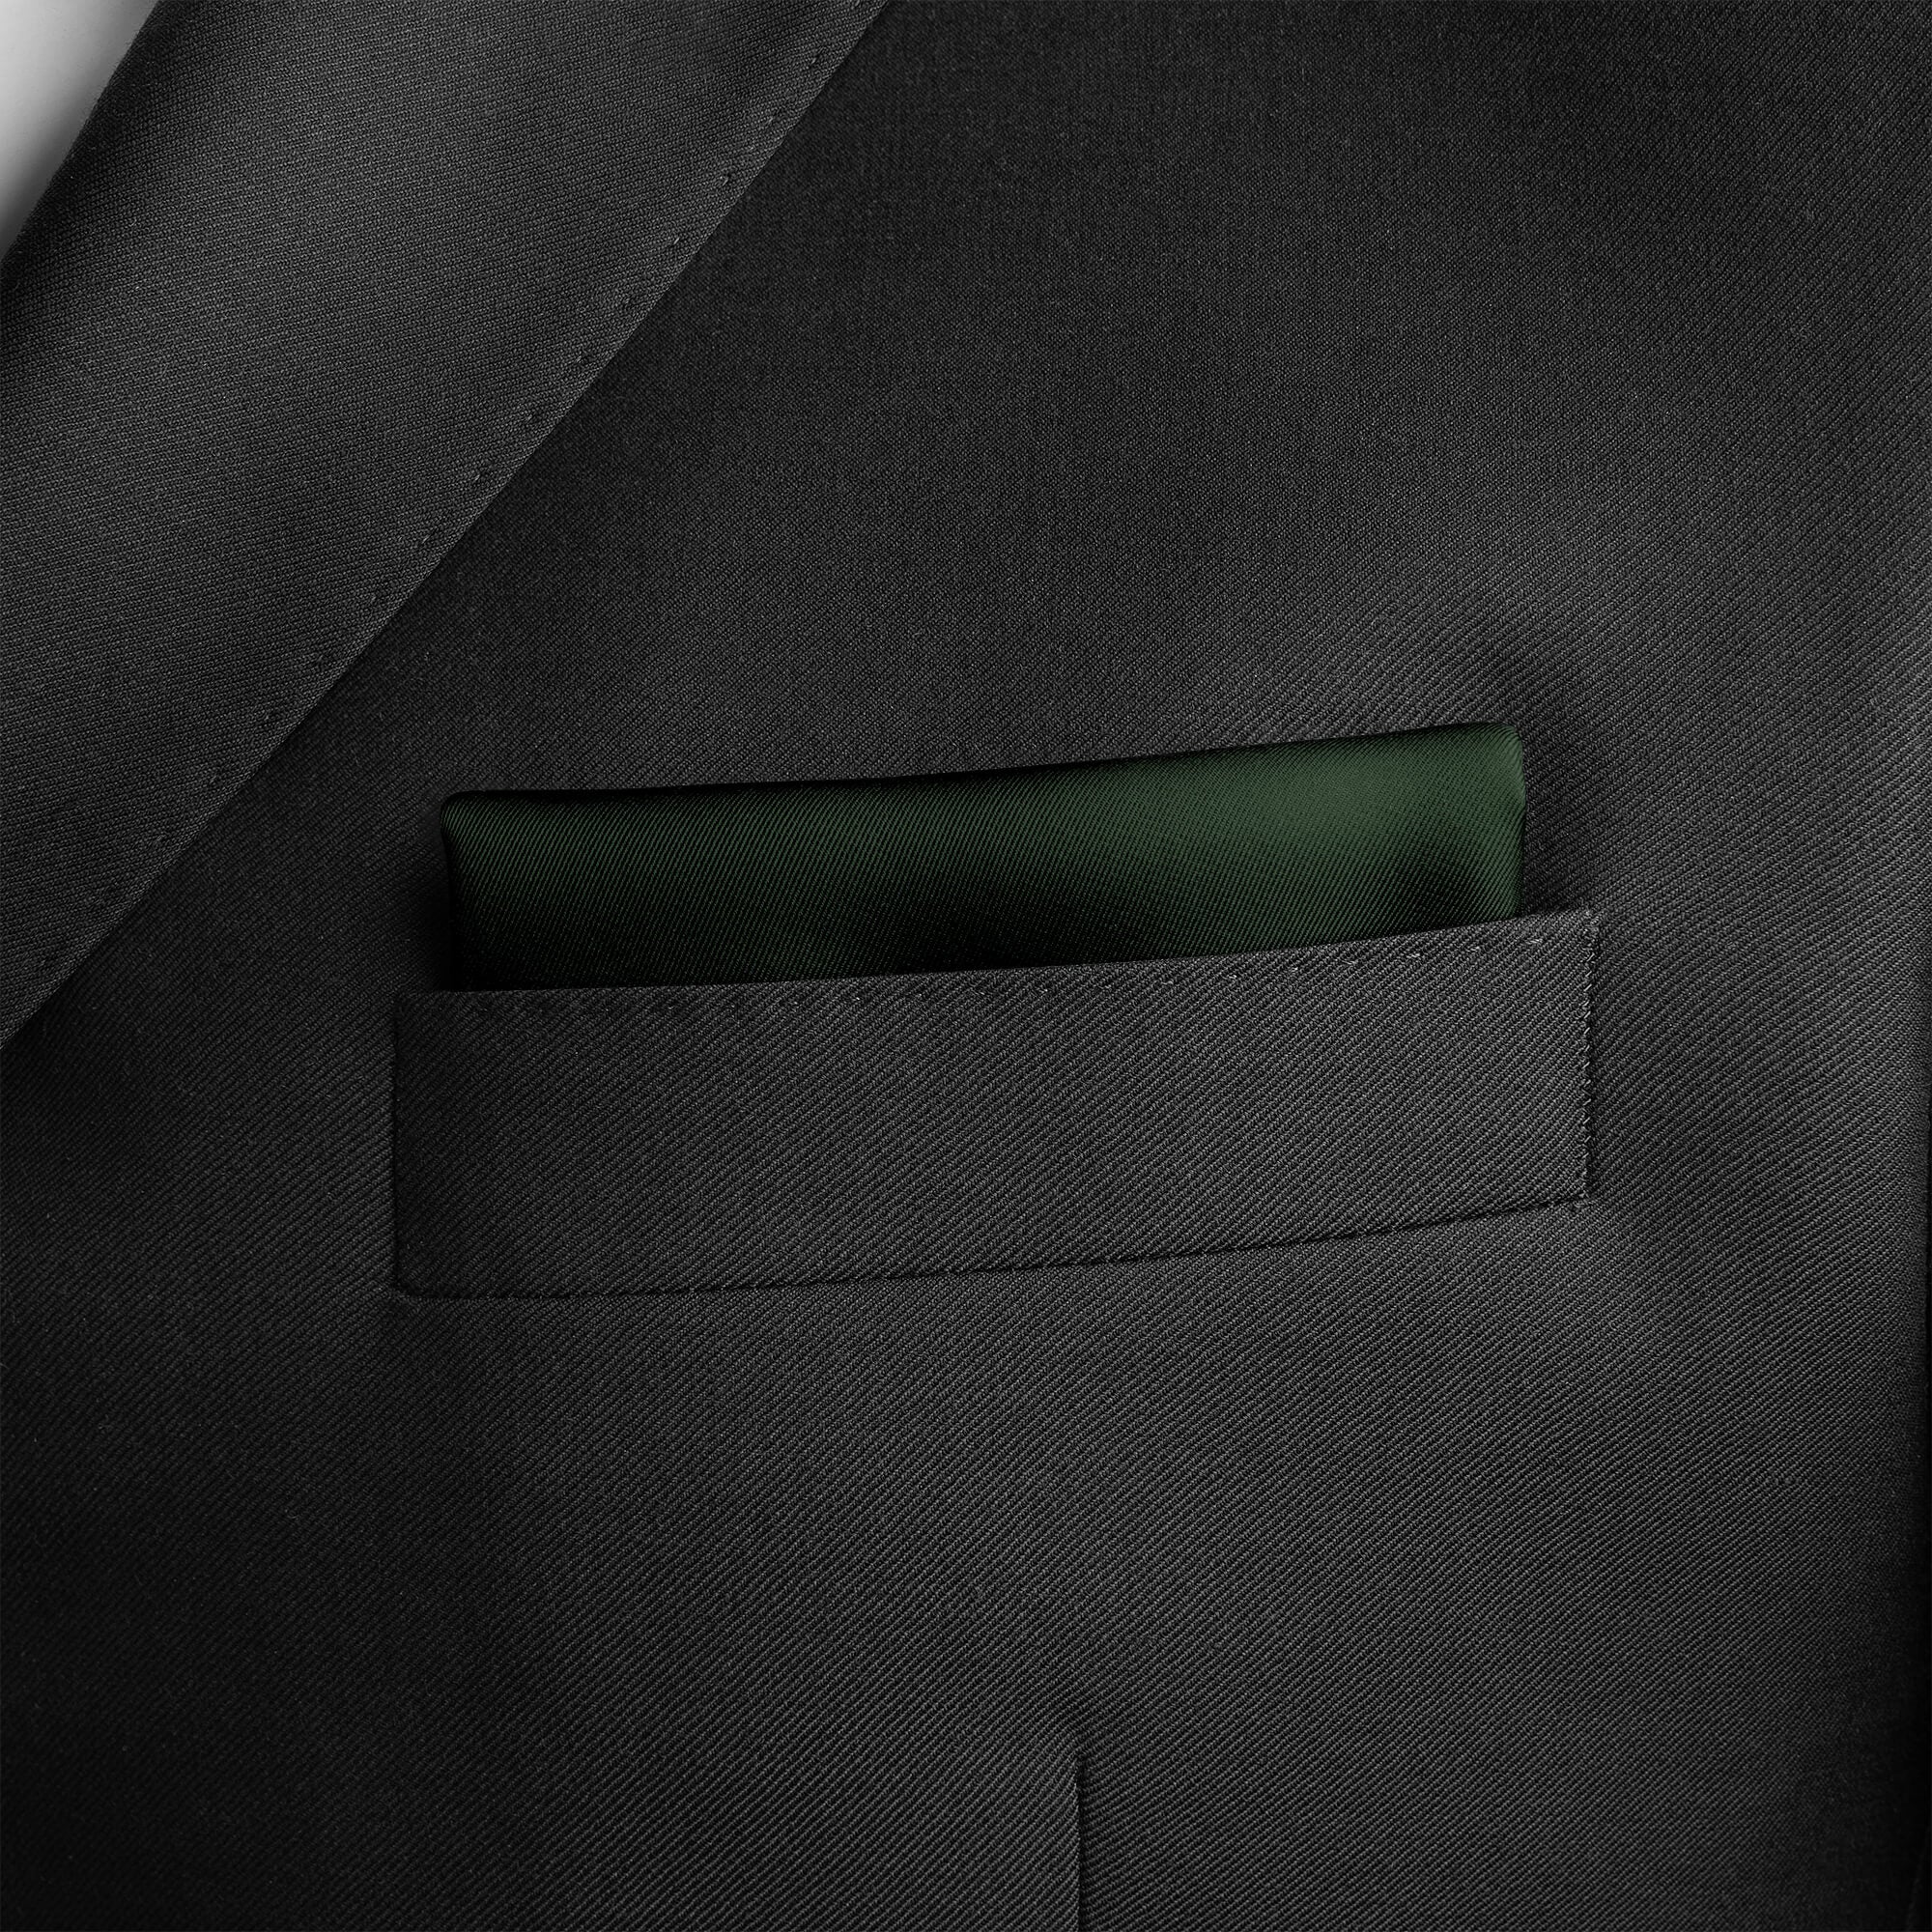 THE SOLID GREEN SILK POCKET SQUARE